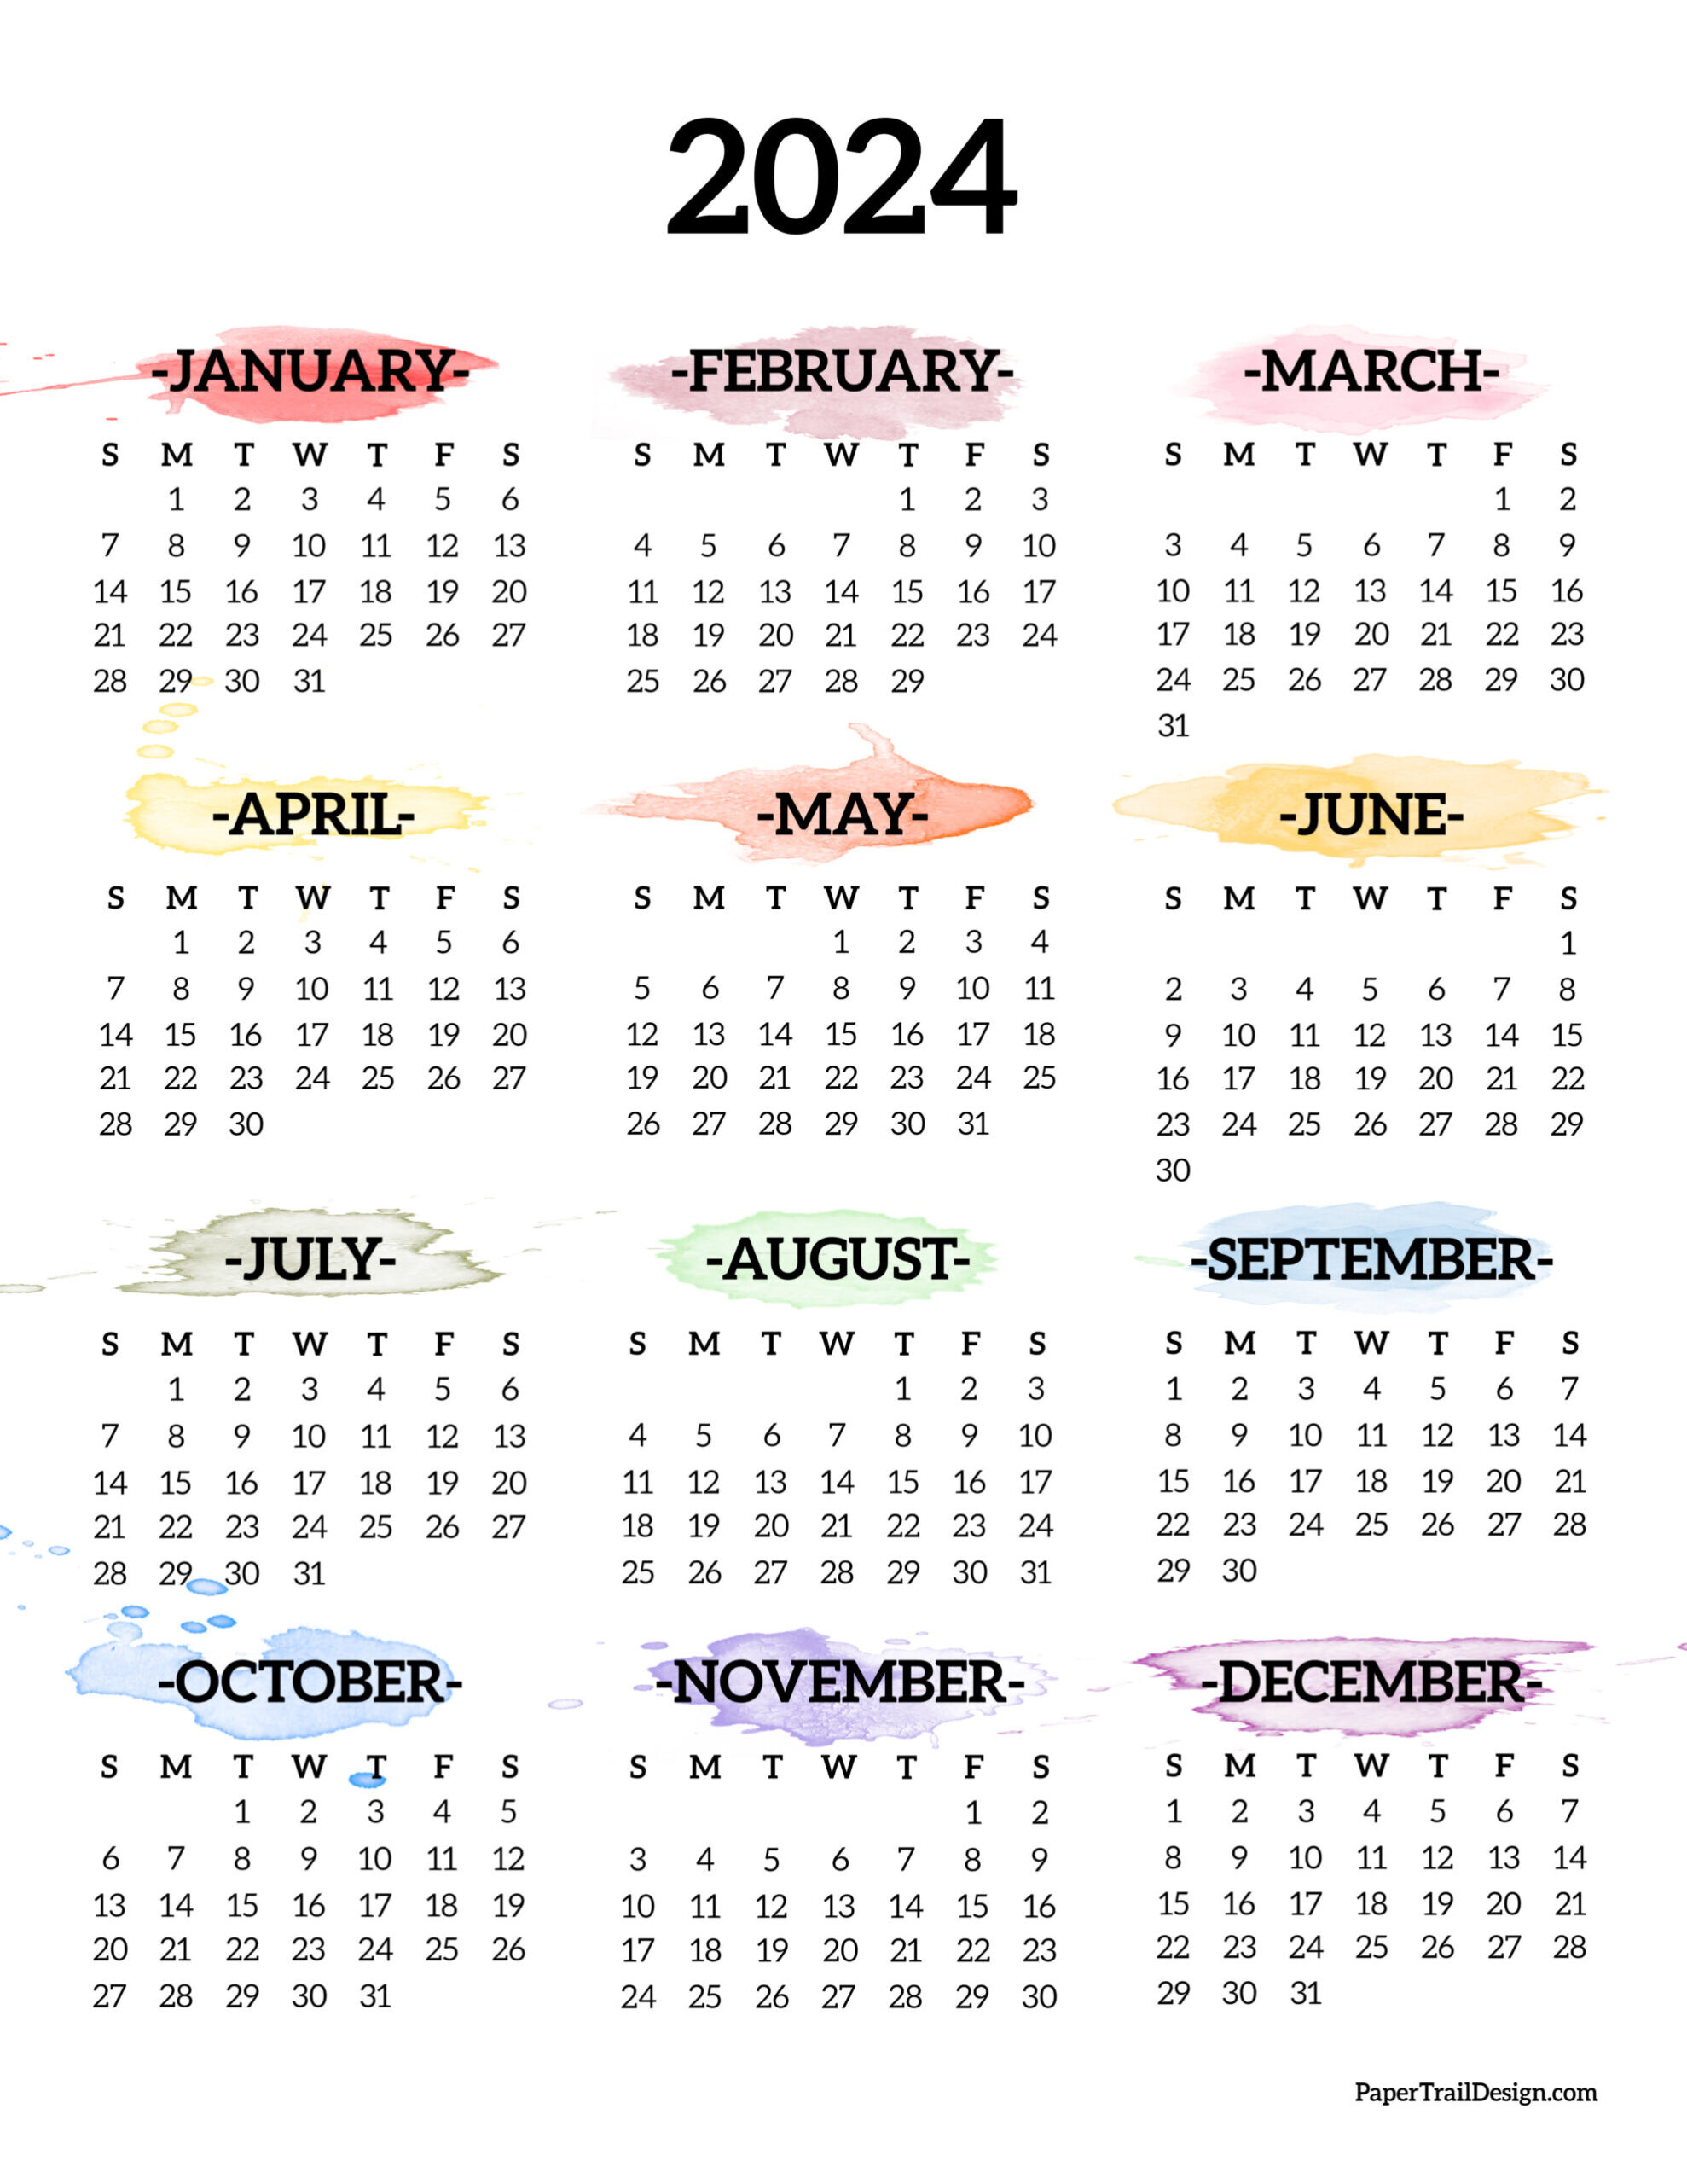 Calendar 2024 Printable One Page - Paper Trail Design for 2024 Calendar Year At A Glance Printable